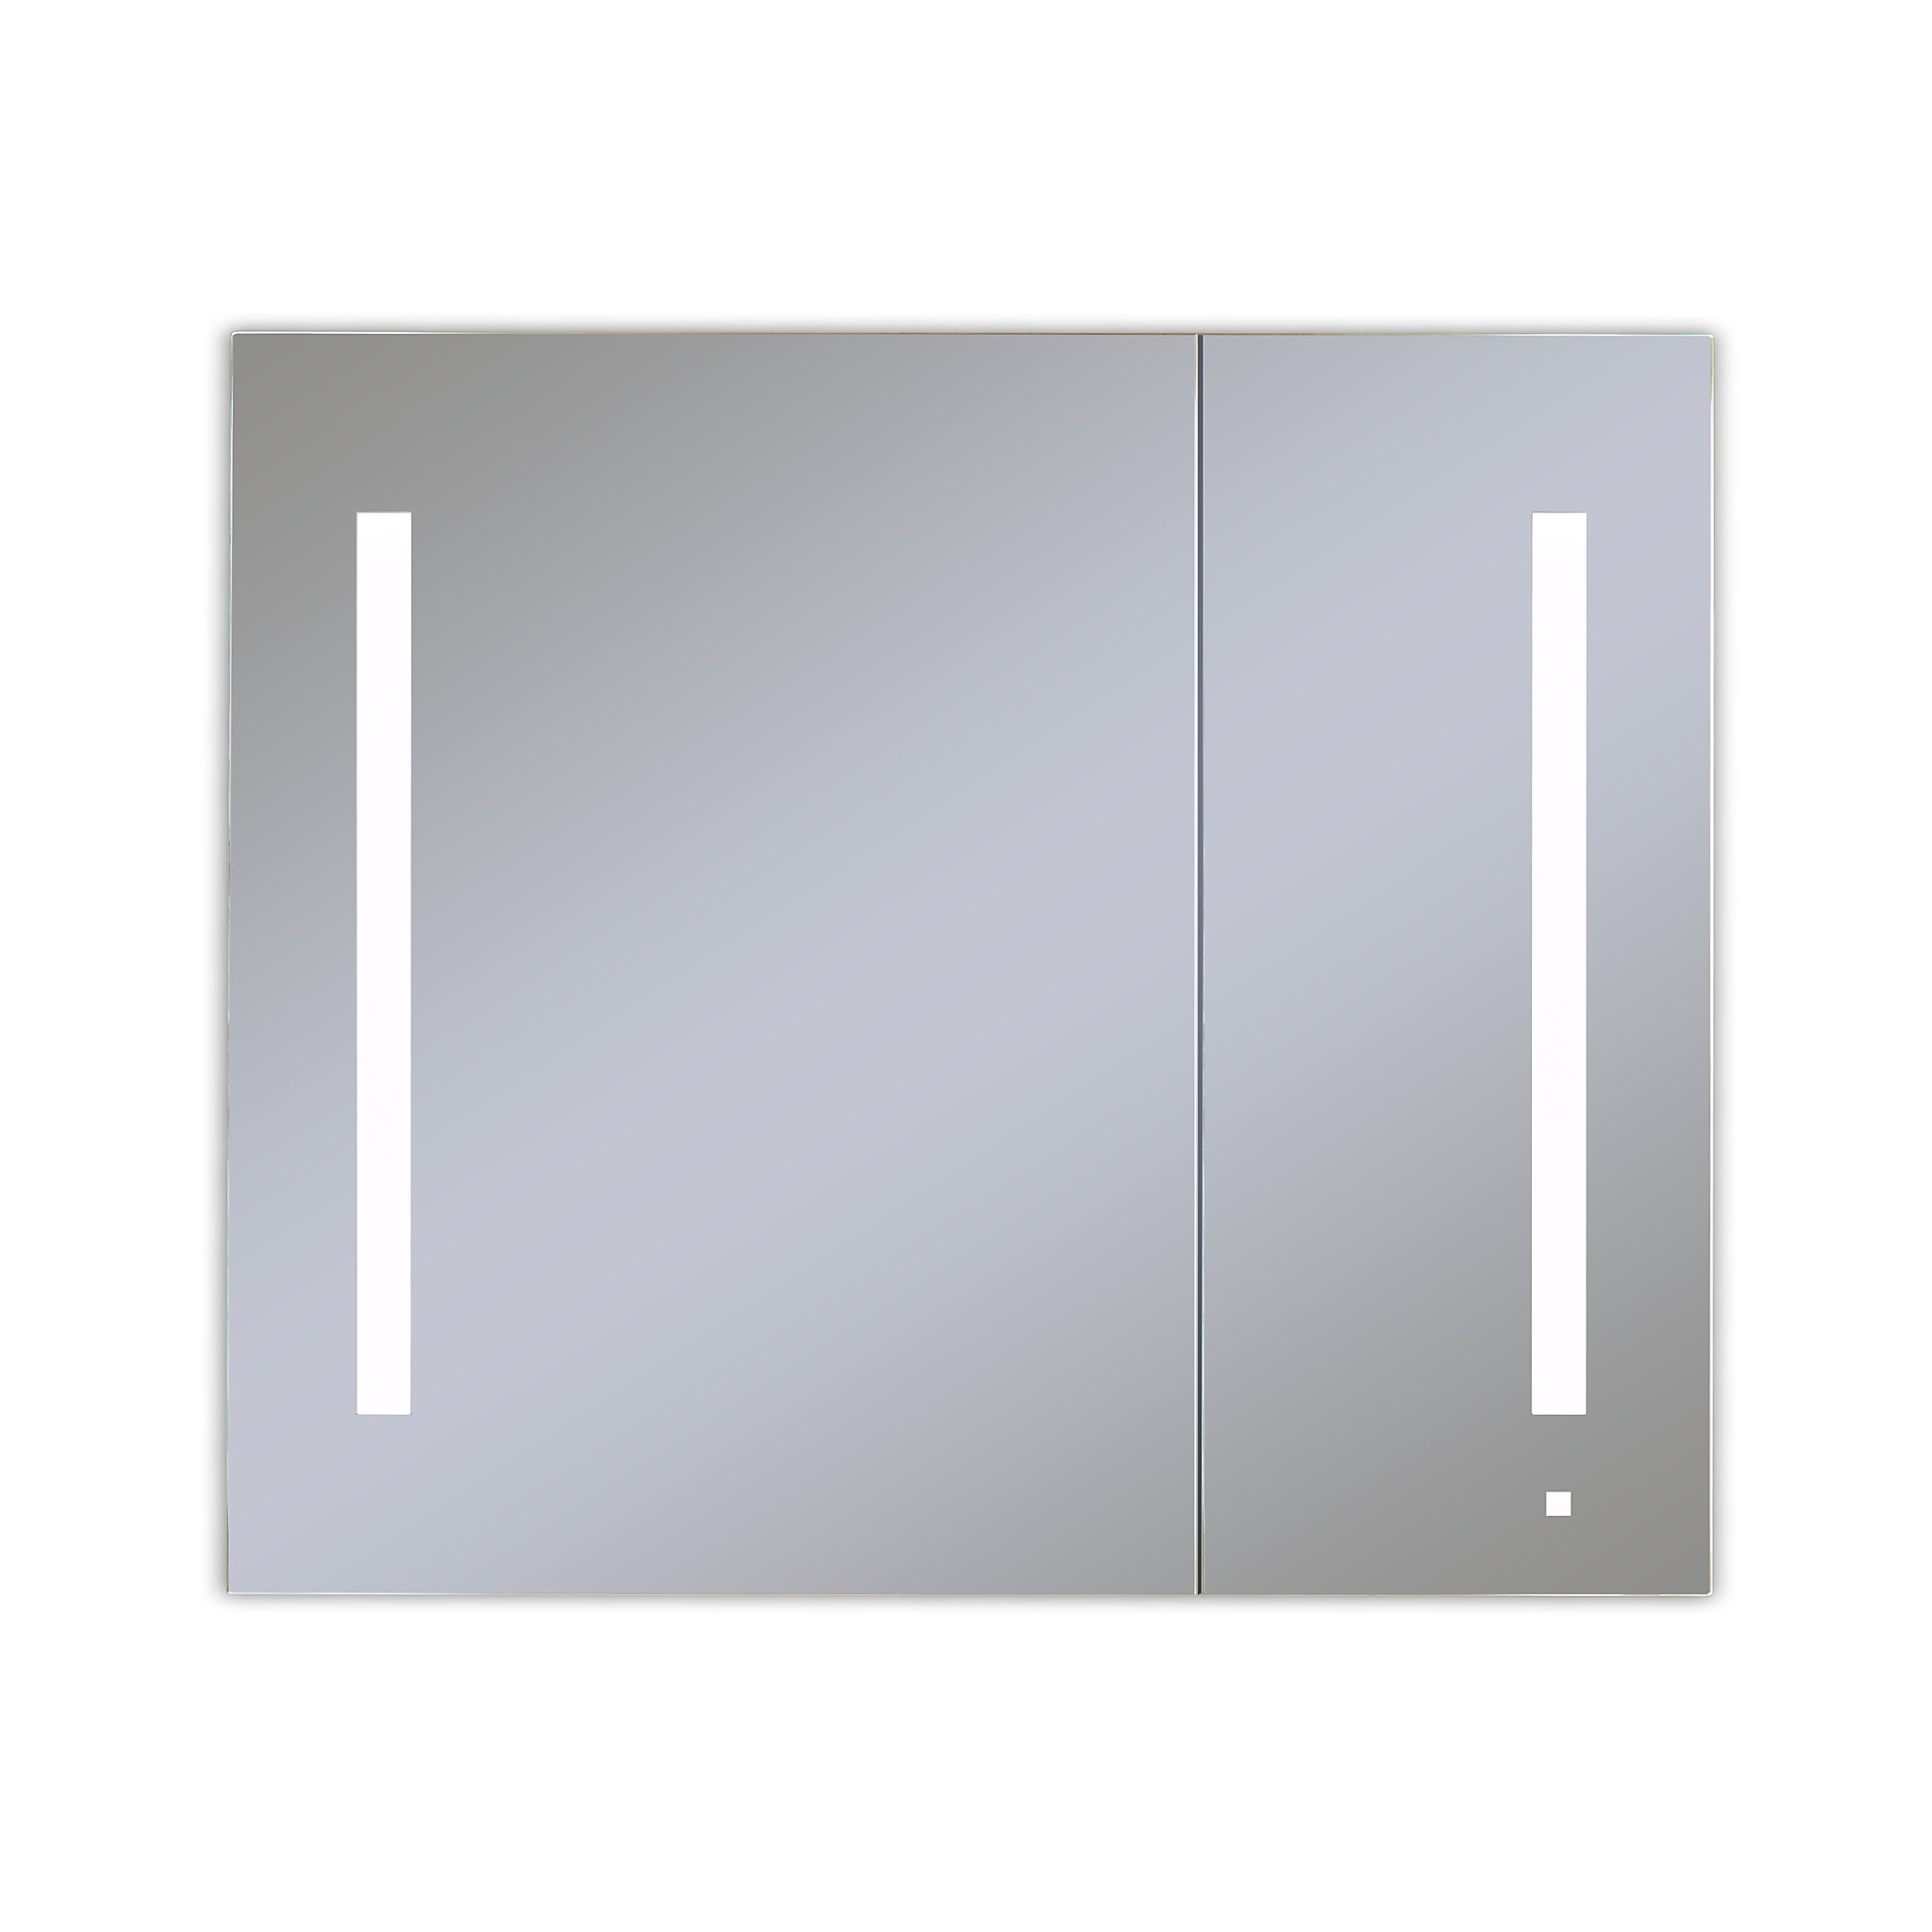 Robern AC3630D4P2L AiO Lighted Cabinet, 36" x 30" x 4", Two Door, LUM Lighting, 4000K Temperature (Cool Light), Dimmable, Electr